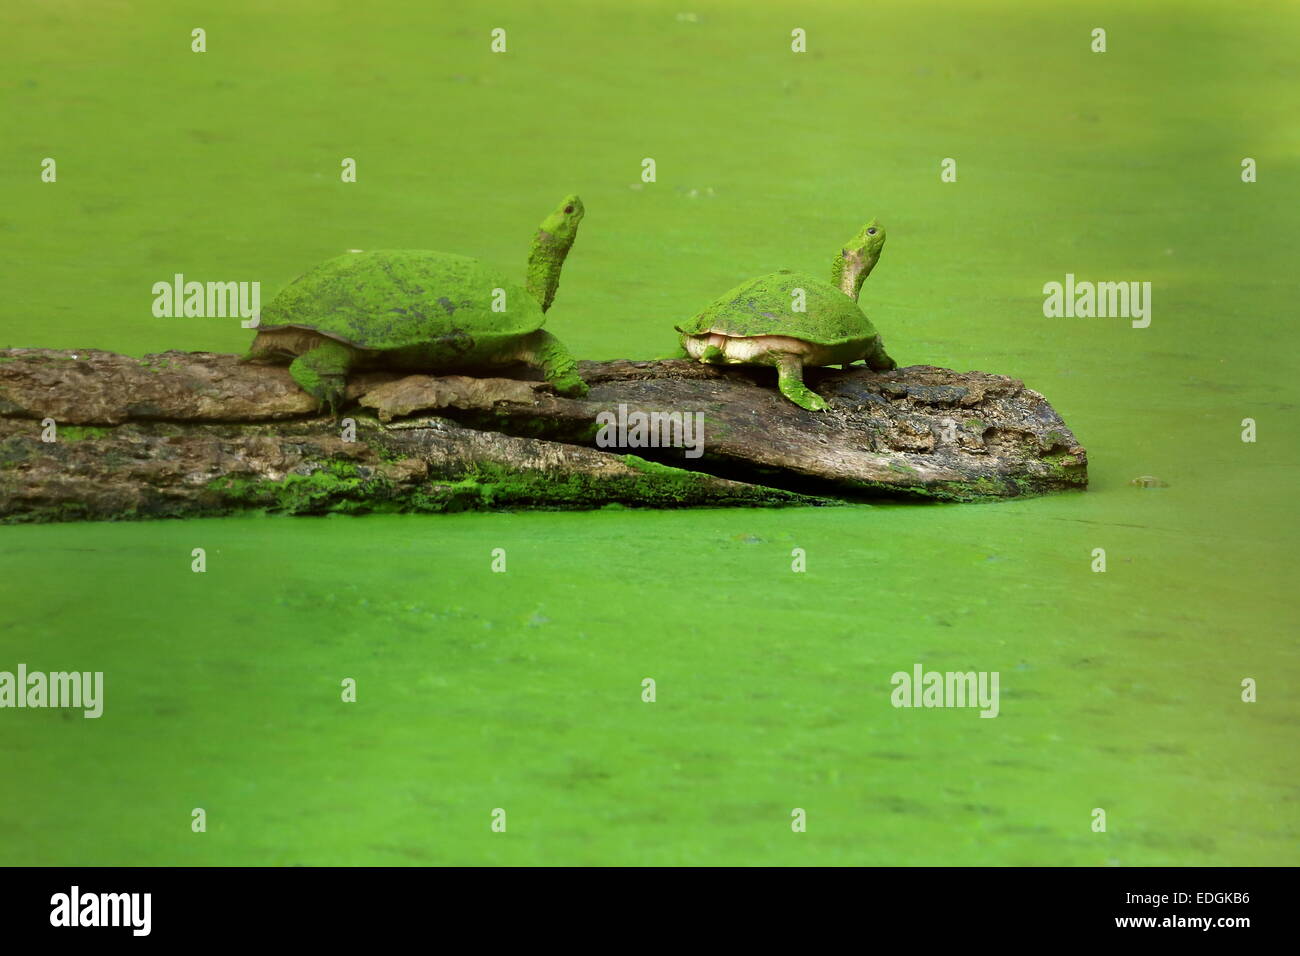 Couple of asian leaf turtles -cyclemys dentata- on a wooden log over green scum covered pond in the grounds of the Gharial C.P. Stock Photo